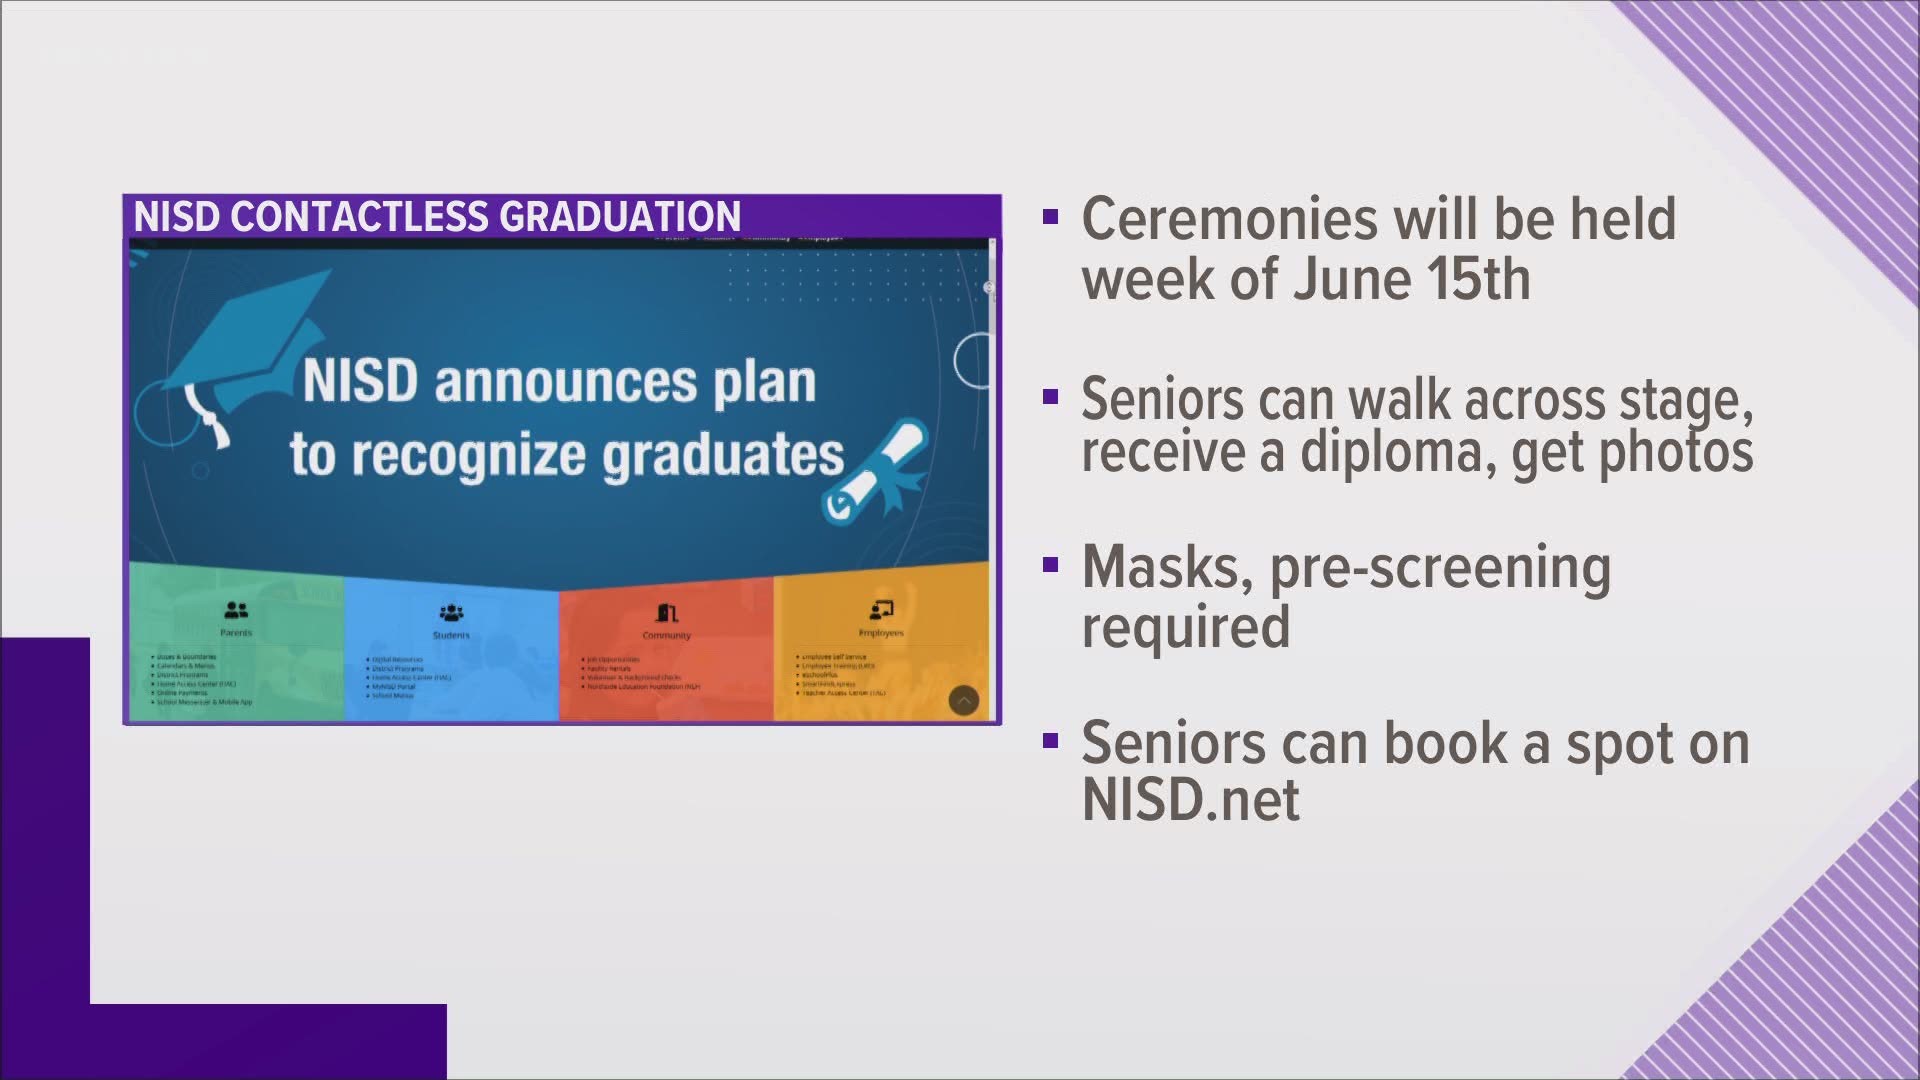 Northside ISD announces plans amid the pandemic for 'contactless' graduation ceremonies, all set to happen over the course of several days during the week of June 15